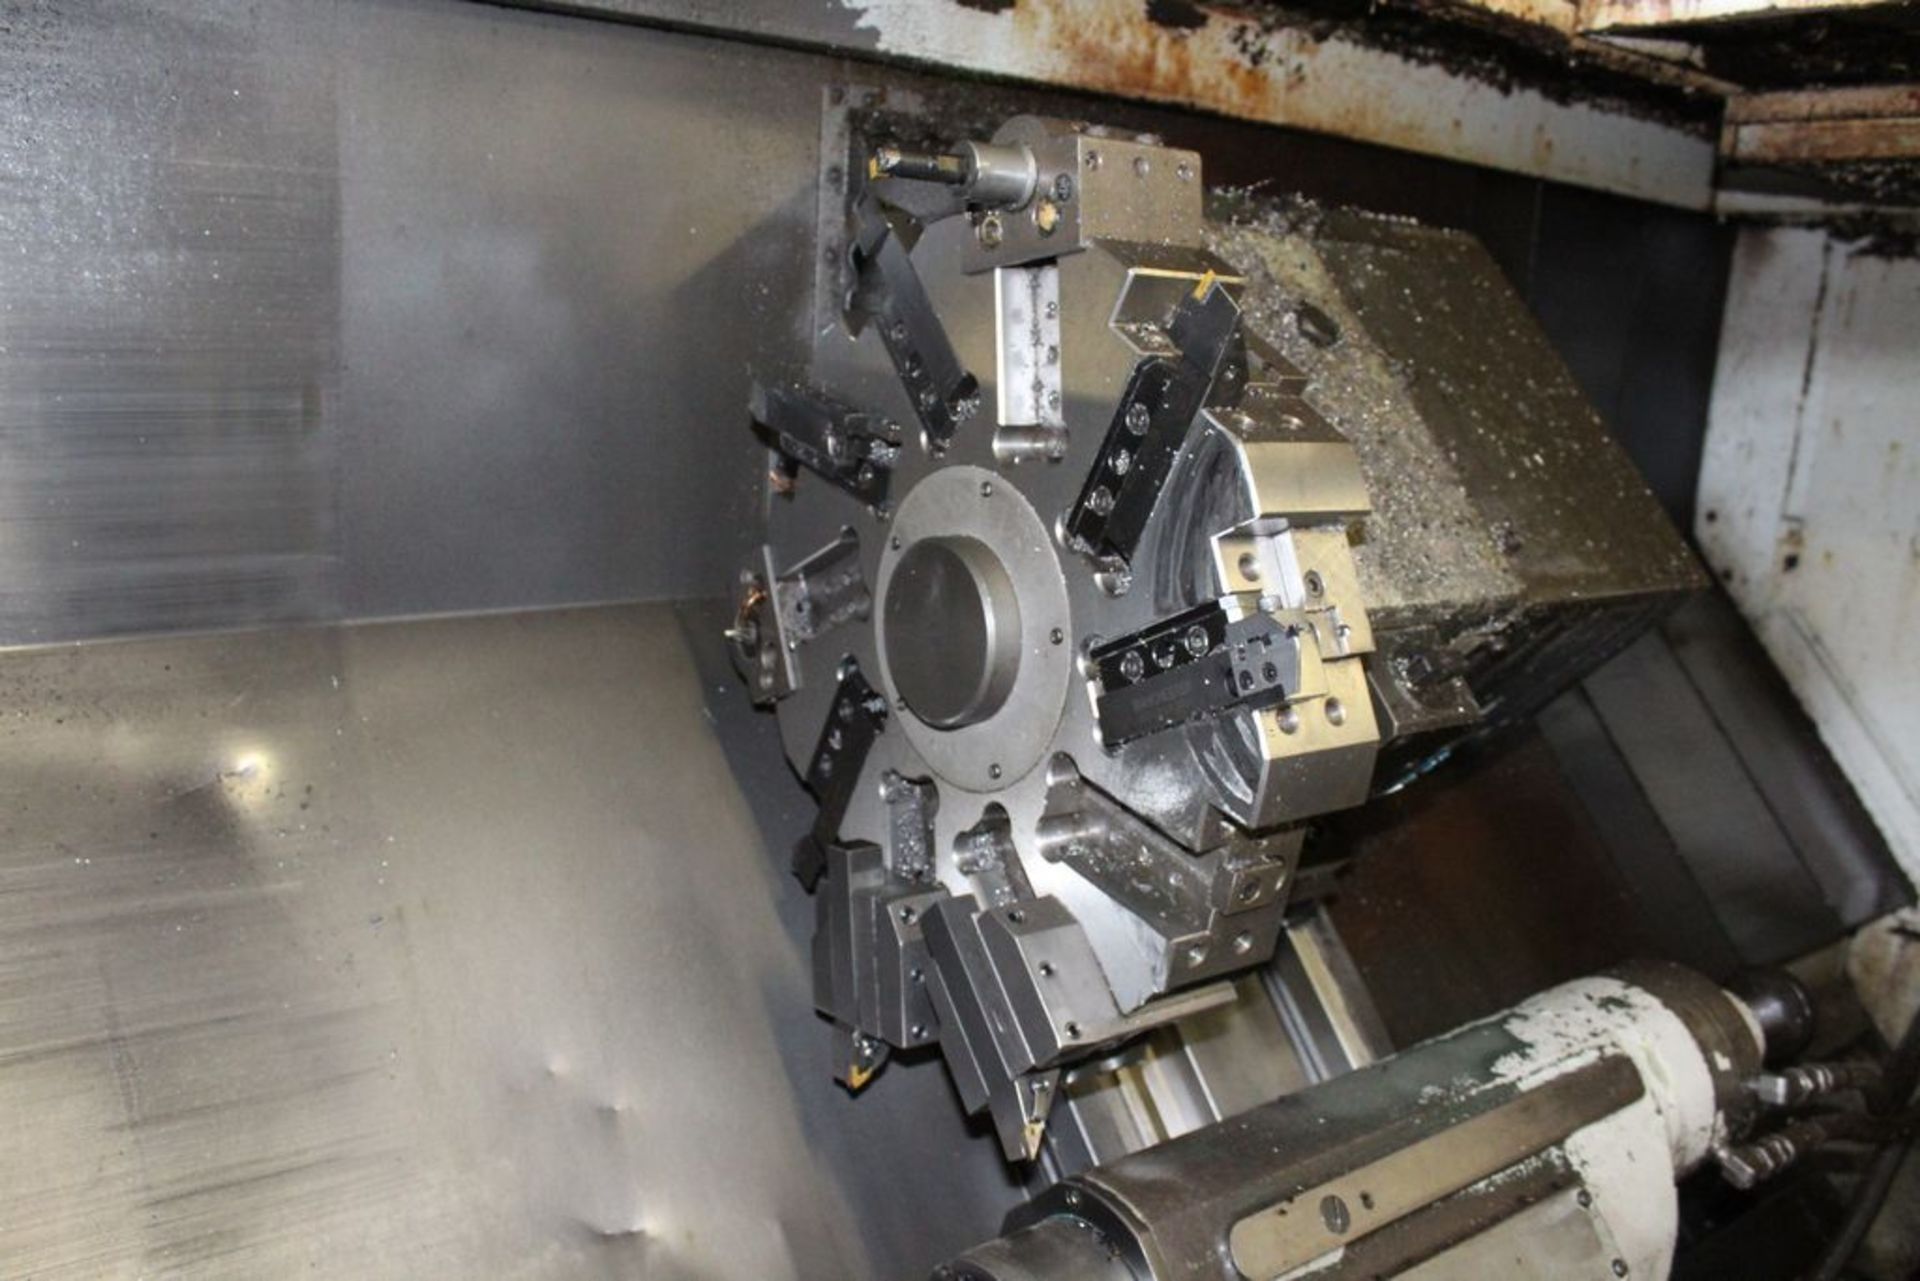 MORI SEIKI MODEL SL-25 CNC TURNING CENTER, S/N 6521, 10ö 3-JAW CHUCK, TAILSTOCK, MF-T6 CONTROL, WITH - Image 4 of 6